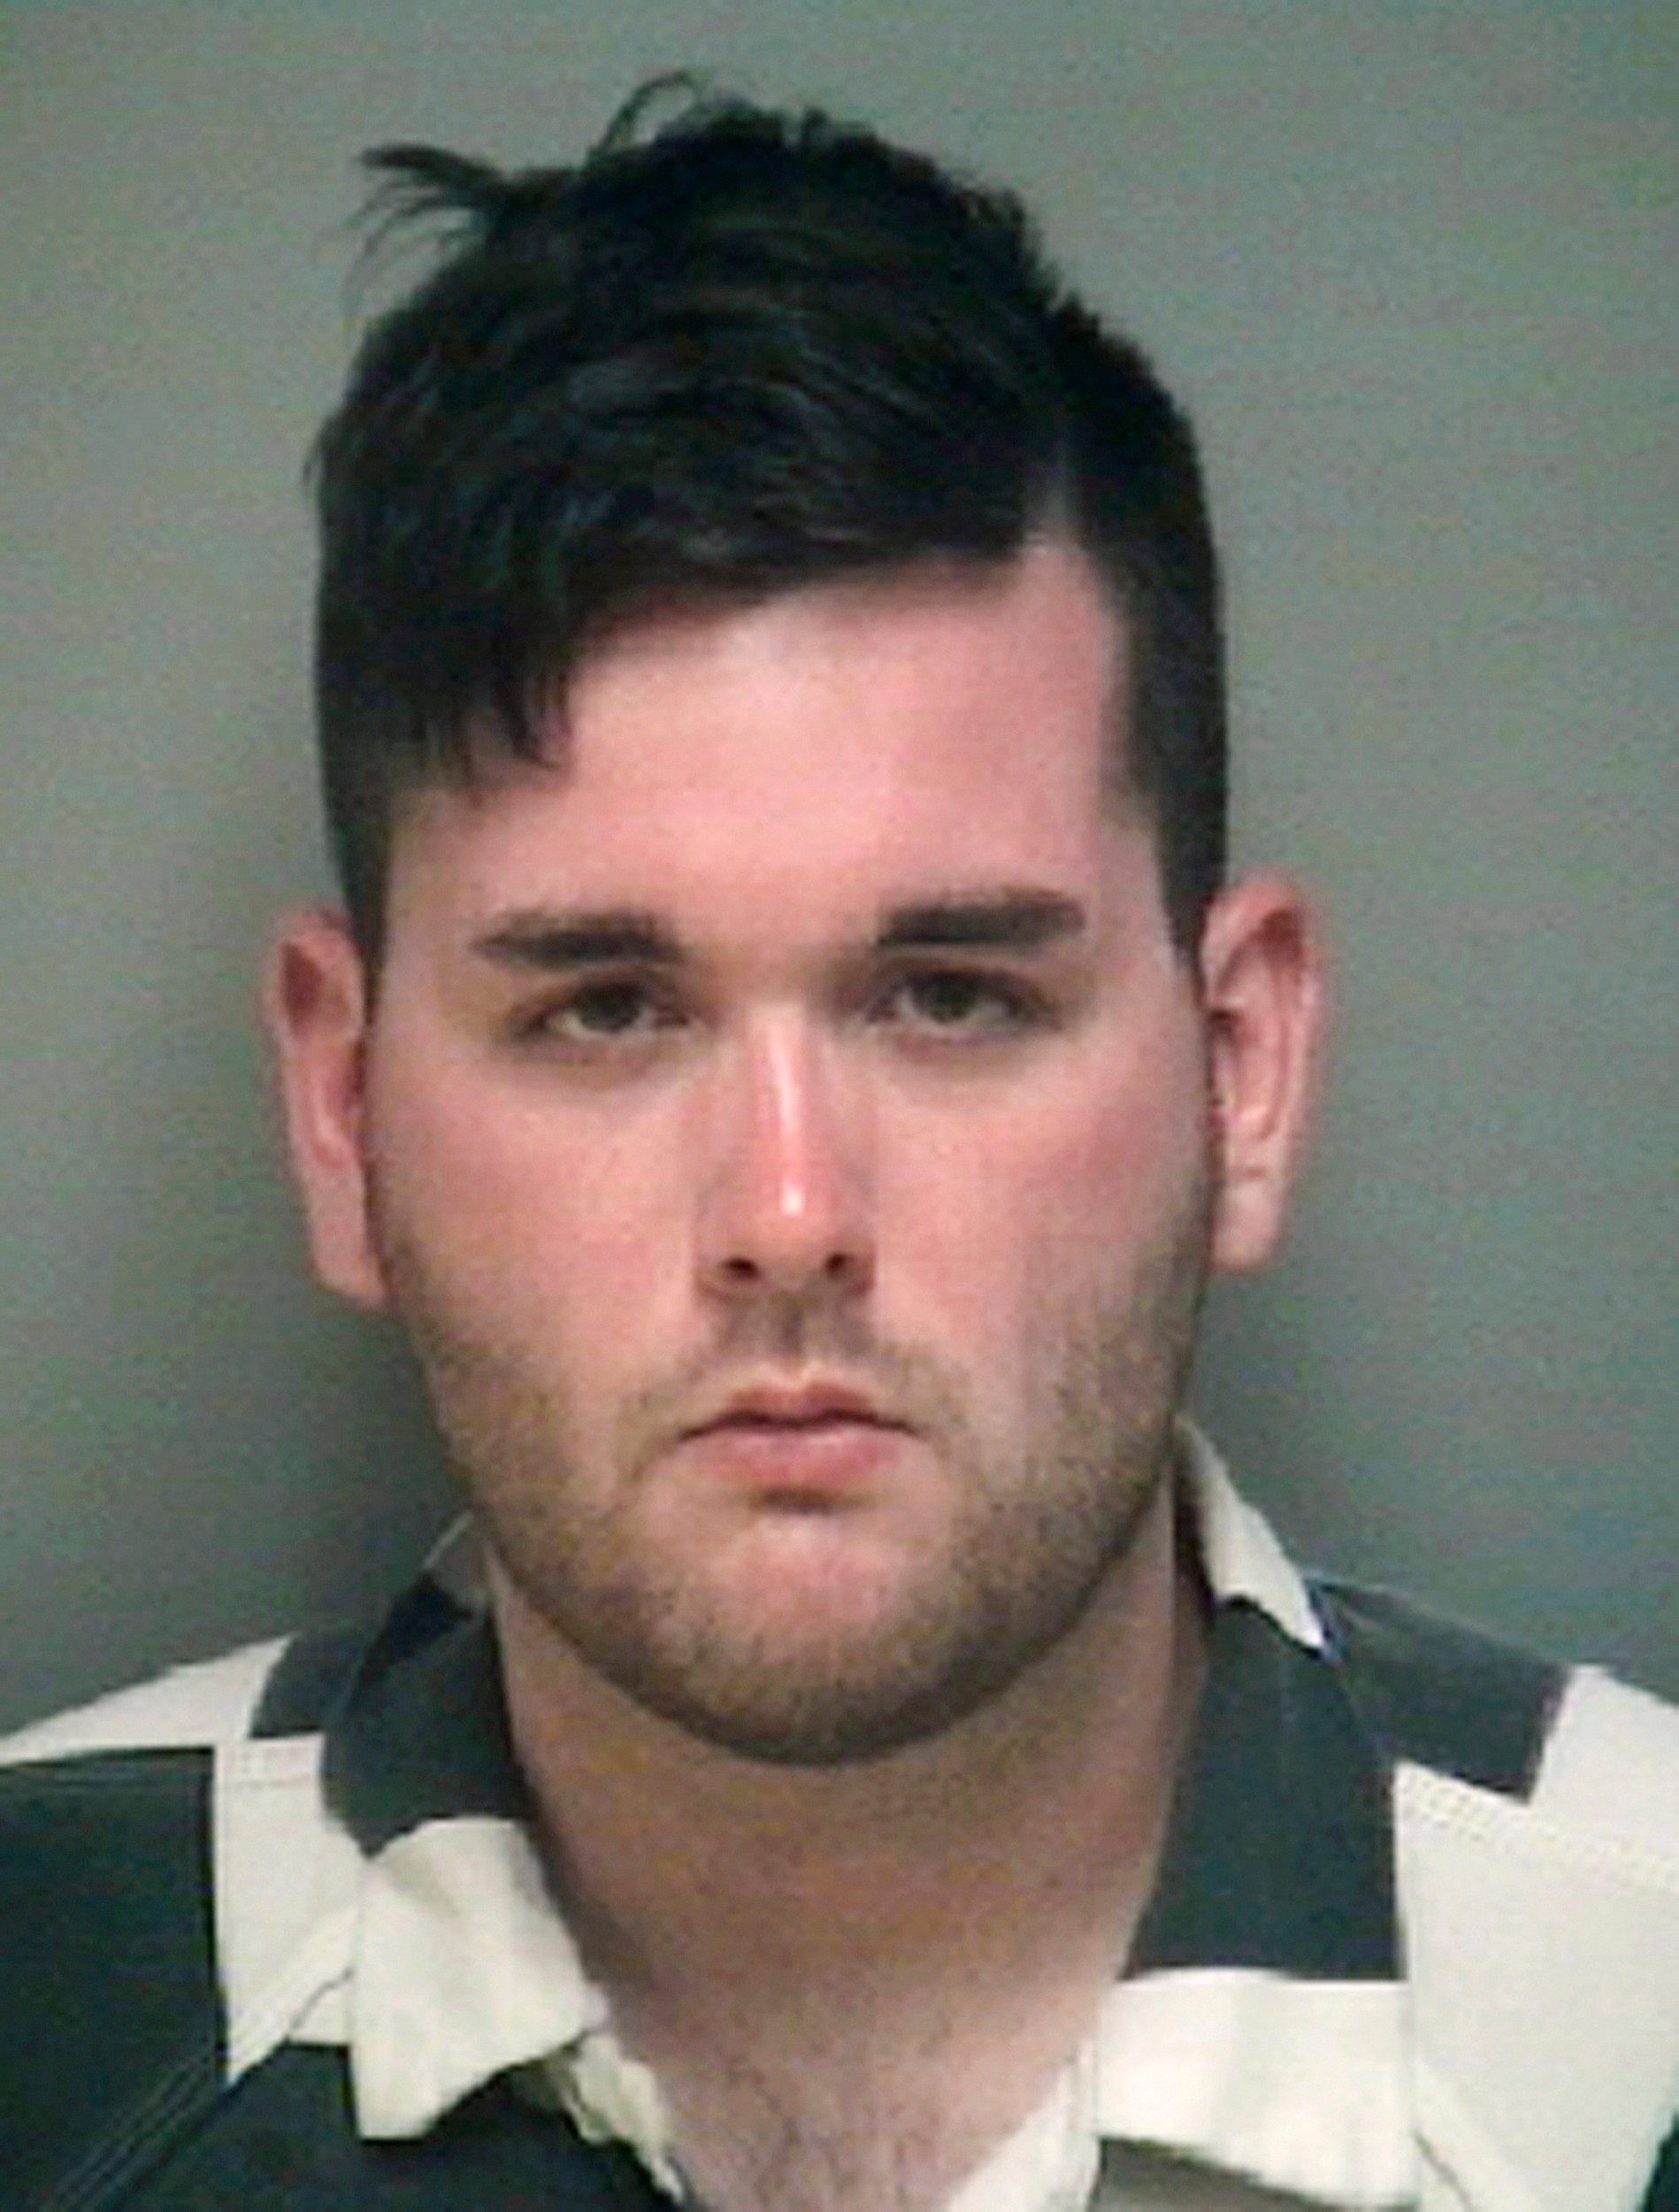 Charlottesville Car Attacker James Alex Fields Pleads Guilty To 29 Federal Hate Crimes Vice News 7340